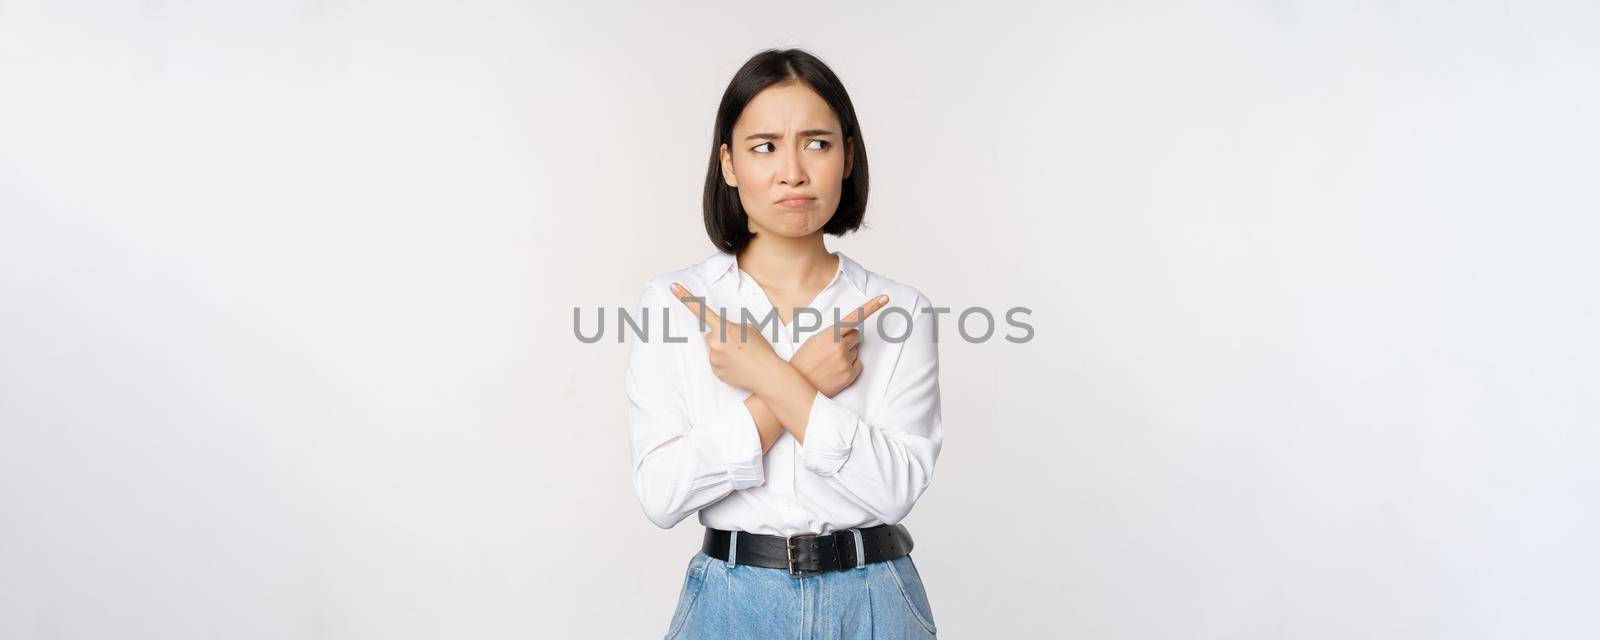 Indecisive asian woman pointing fingers sideways, pointing fingers and looking clueless, confused with choices, standing over white background.